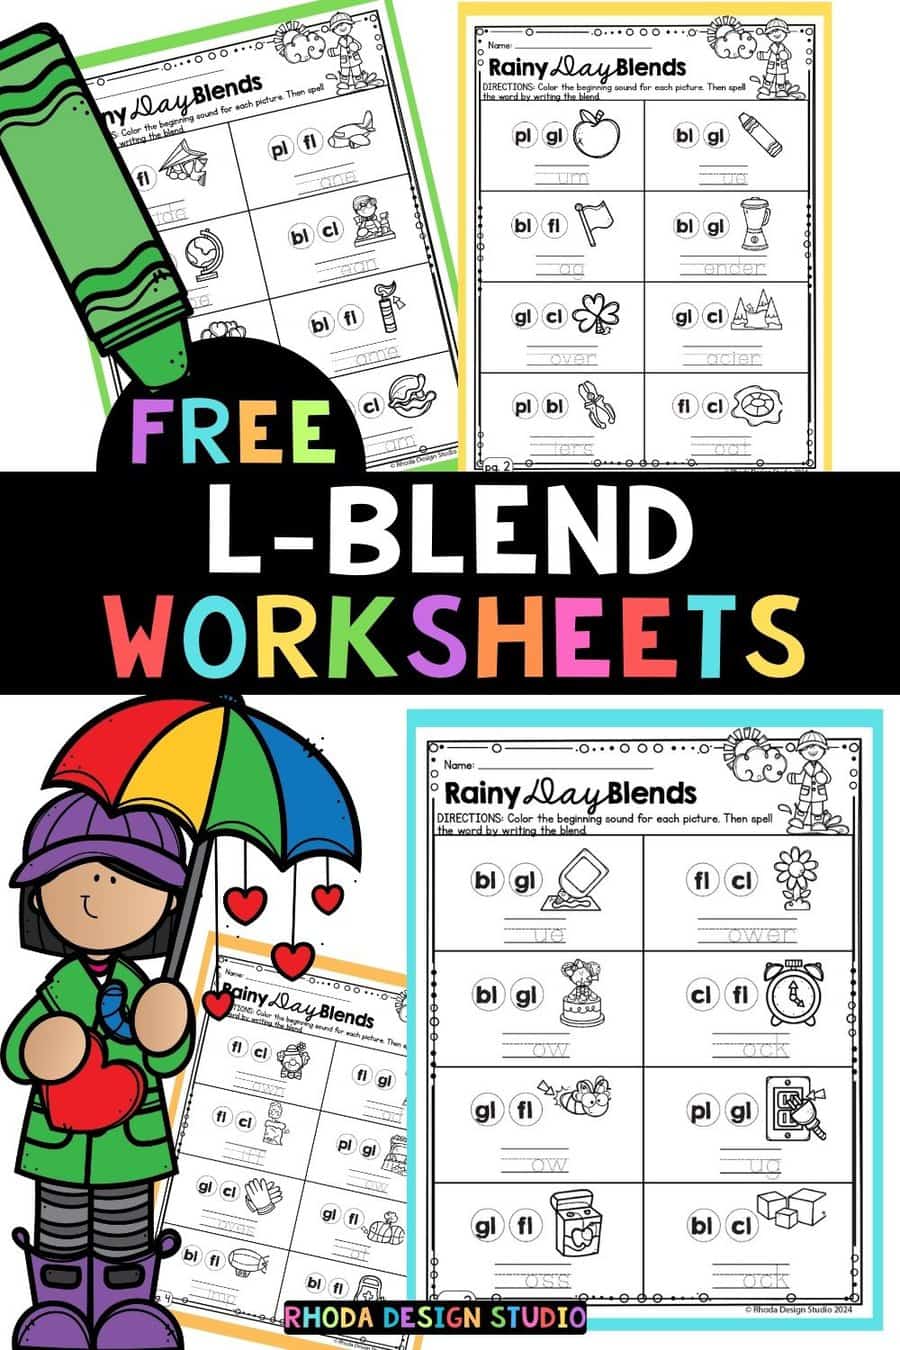 Get 4 free worksheets to help children gain command of consonant blends that include the letter L. Included are targeted words with these beginning L-blends: bl, cl, fl, gl, pl, and sl